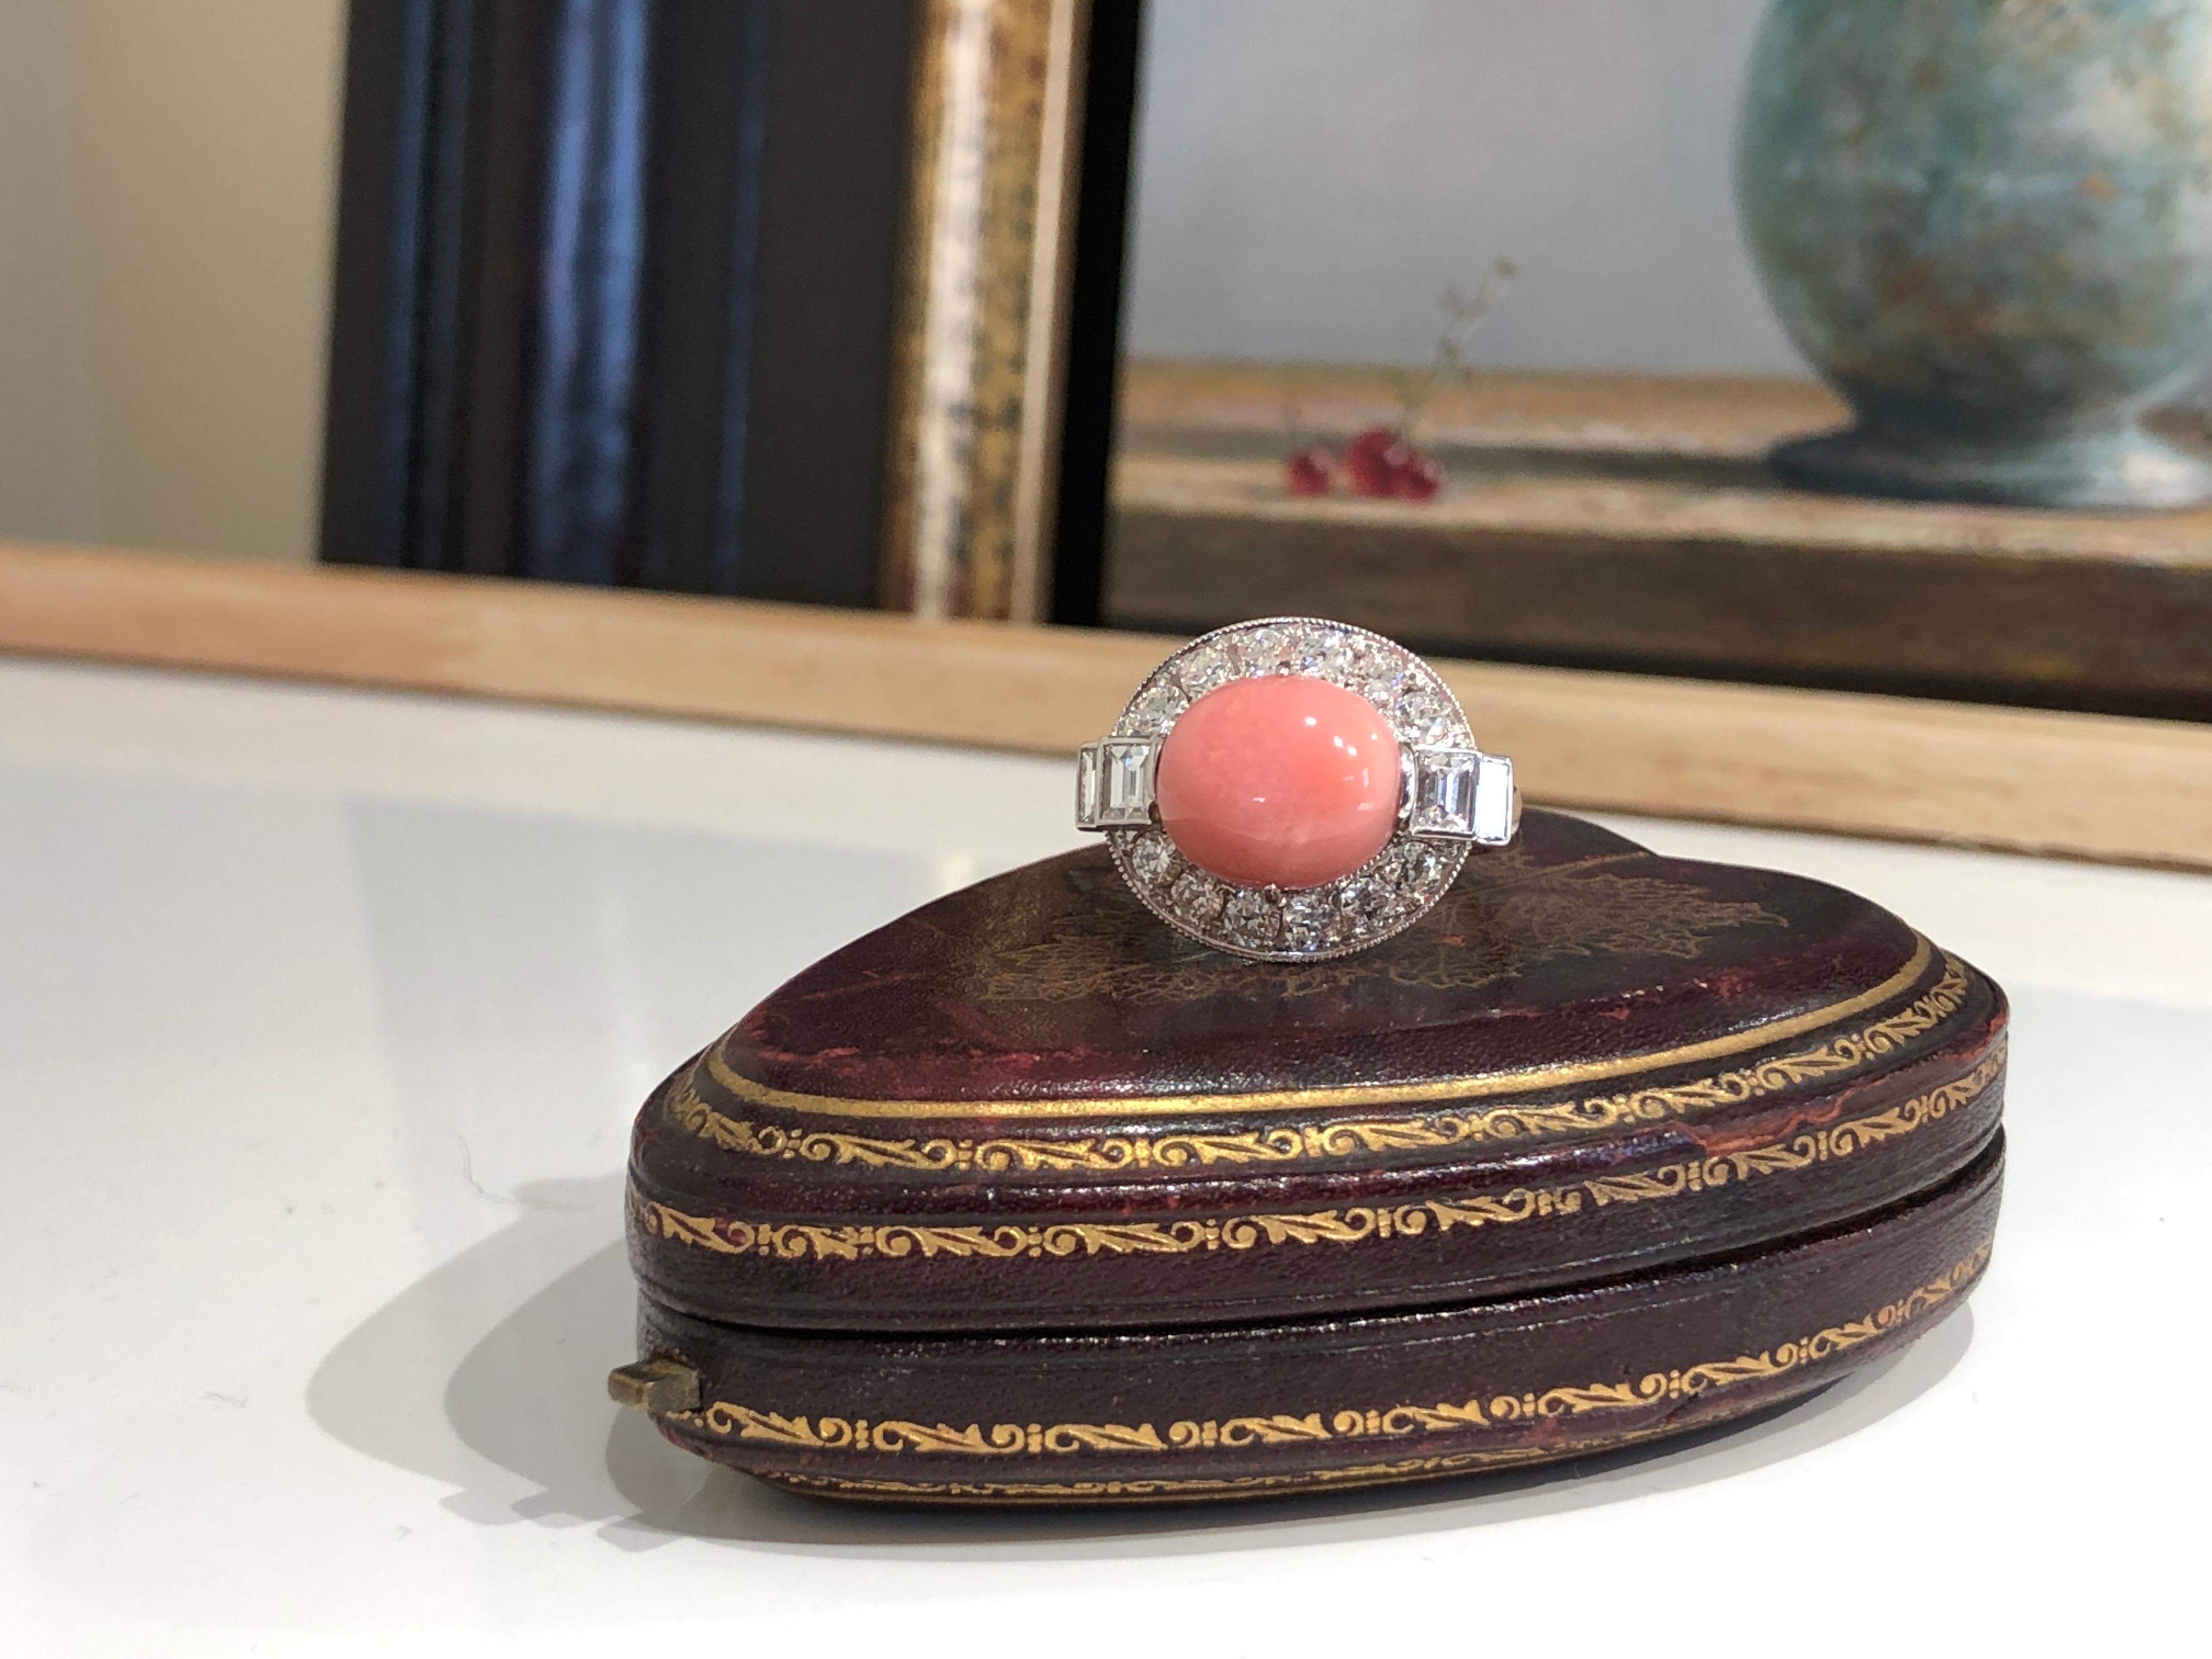 A beautiful and rare natural conch pearl set in a diamond cluster mounting. Conch pearls are very rare and highly collectable, particularly ones that are pink. The central conch pearl in this ring has a lovely baby pink colour with a visible flame